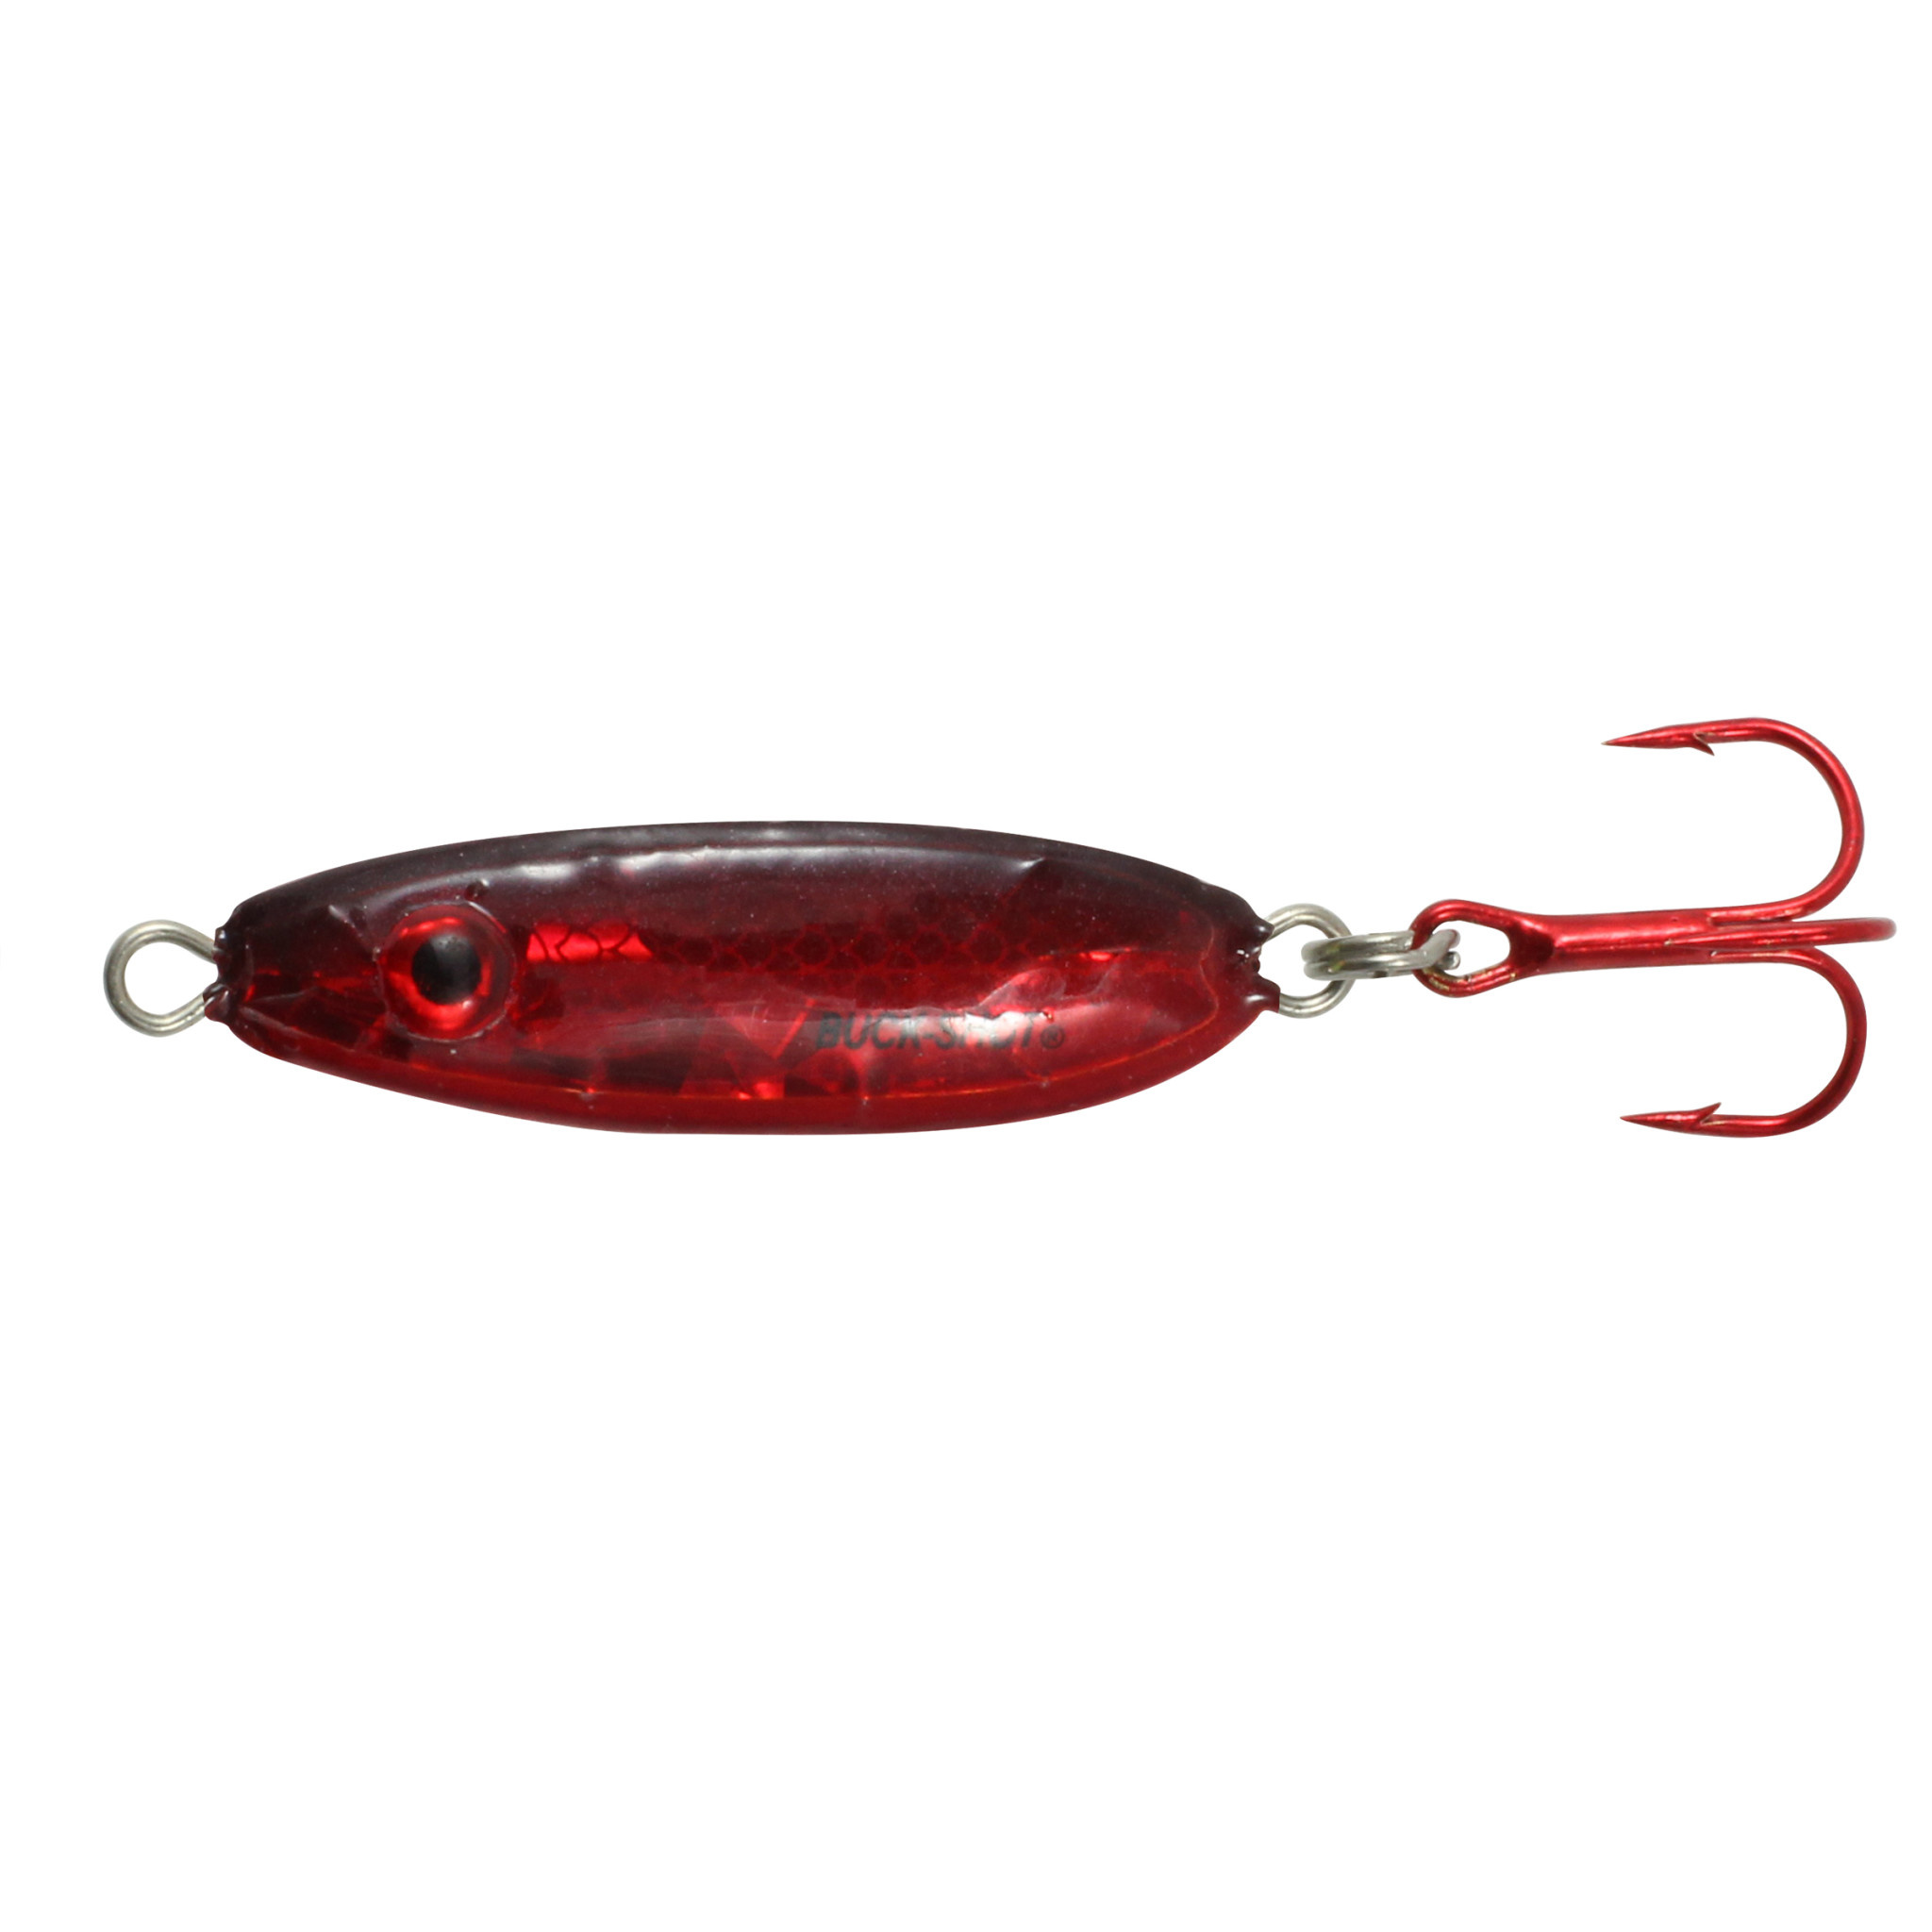 Northland Buckshot Rattle Spoon, 3/4 oz. - Great Lakes Outfitters